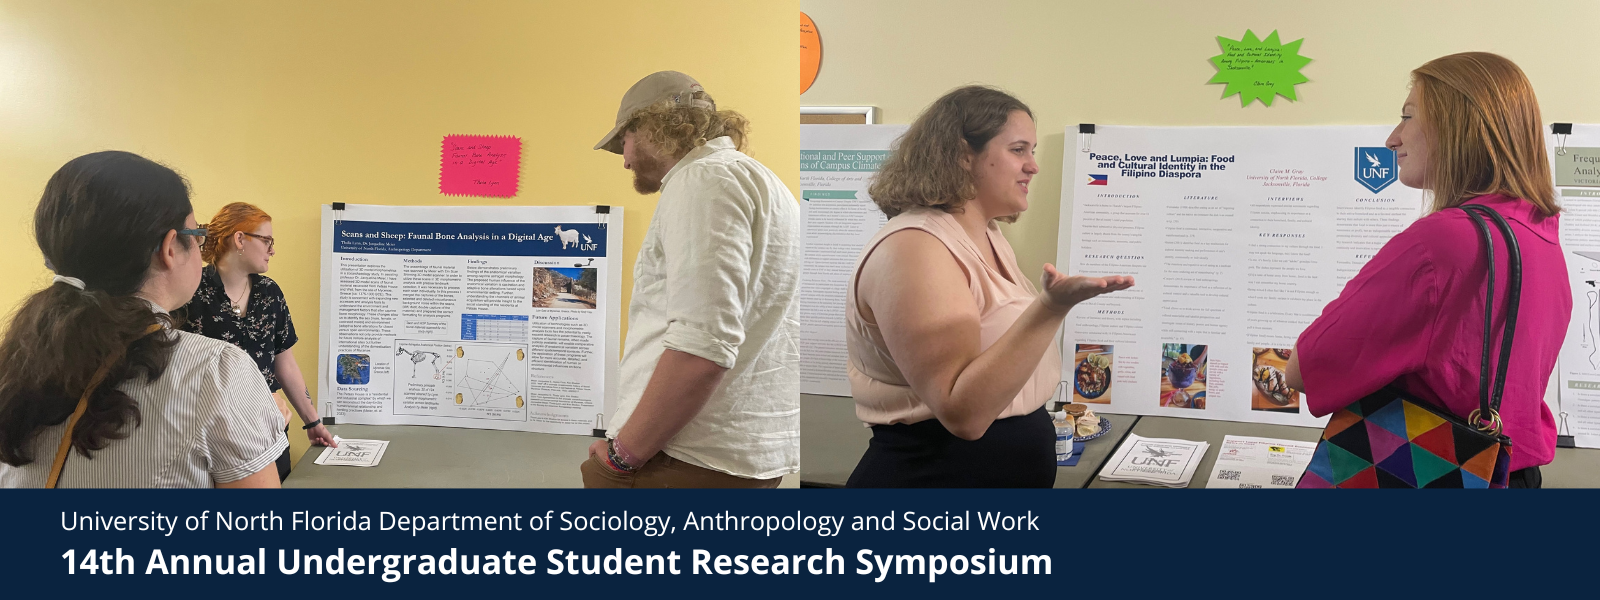 UNF's Department of Sociology, Anthropology and Social Work's 14th Annual Undergraduate Student Research Symposium